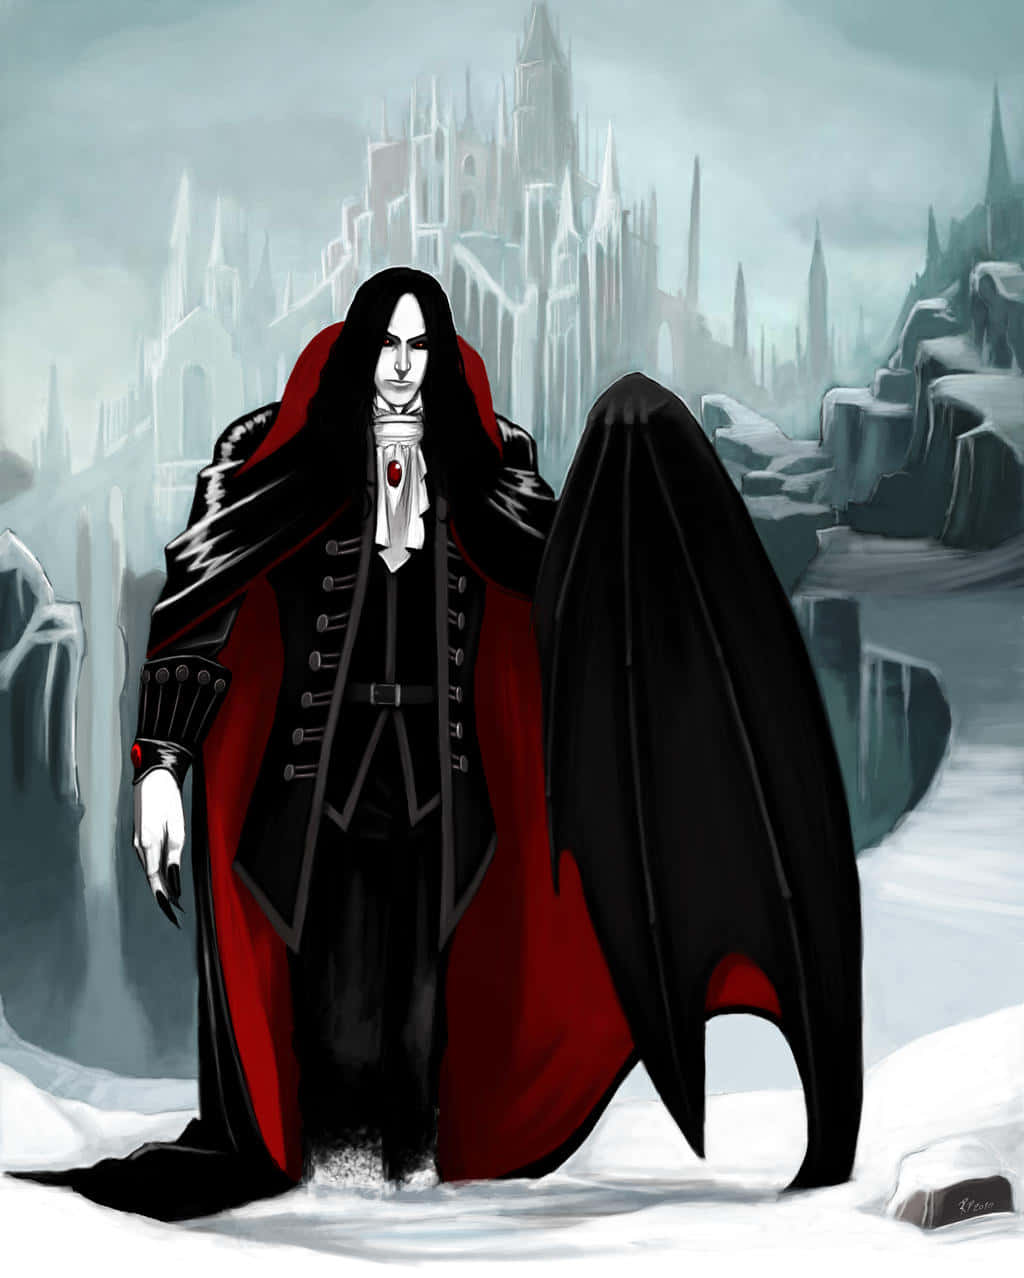 Mysterious Vampire Lord in His Eerie Domain Wallpaper